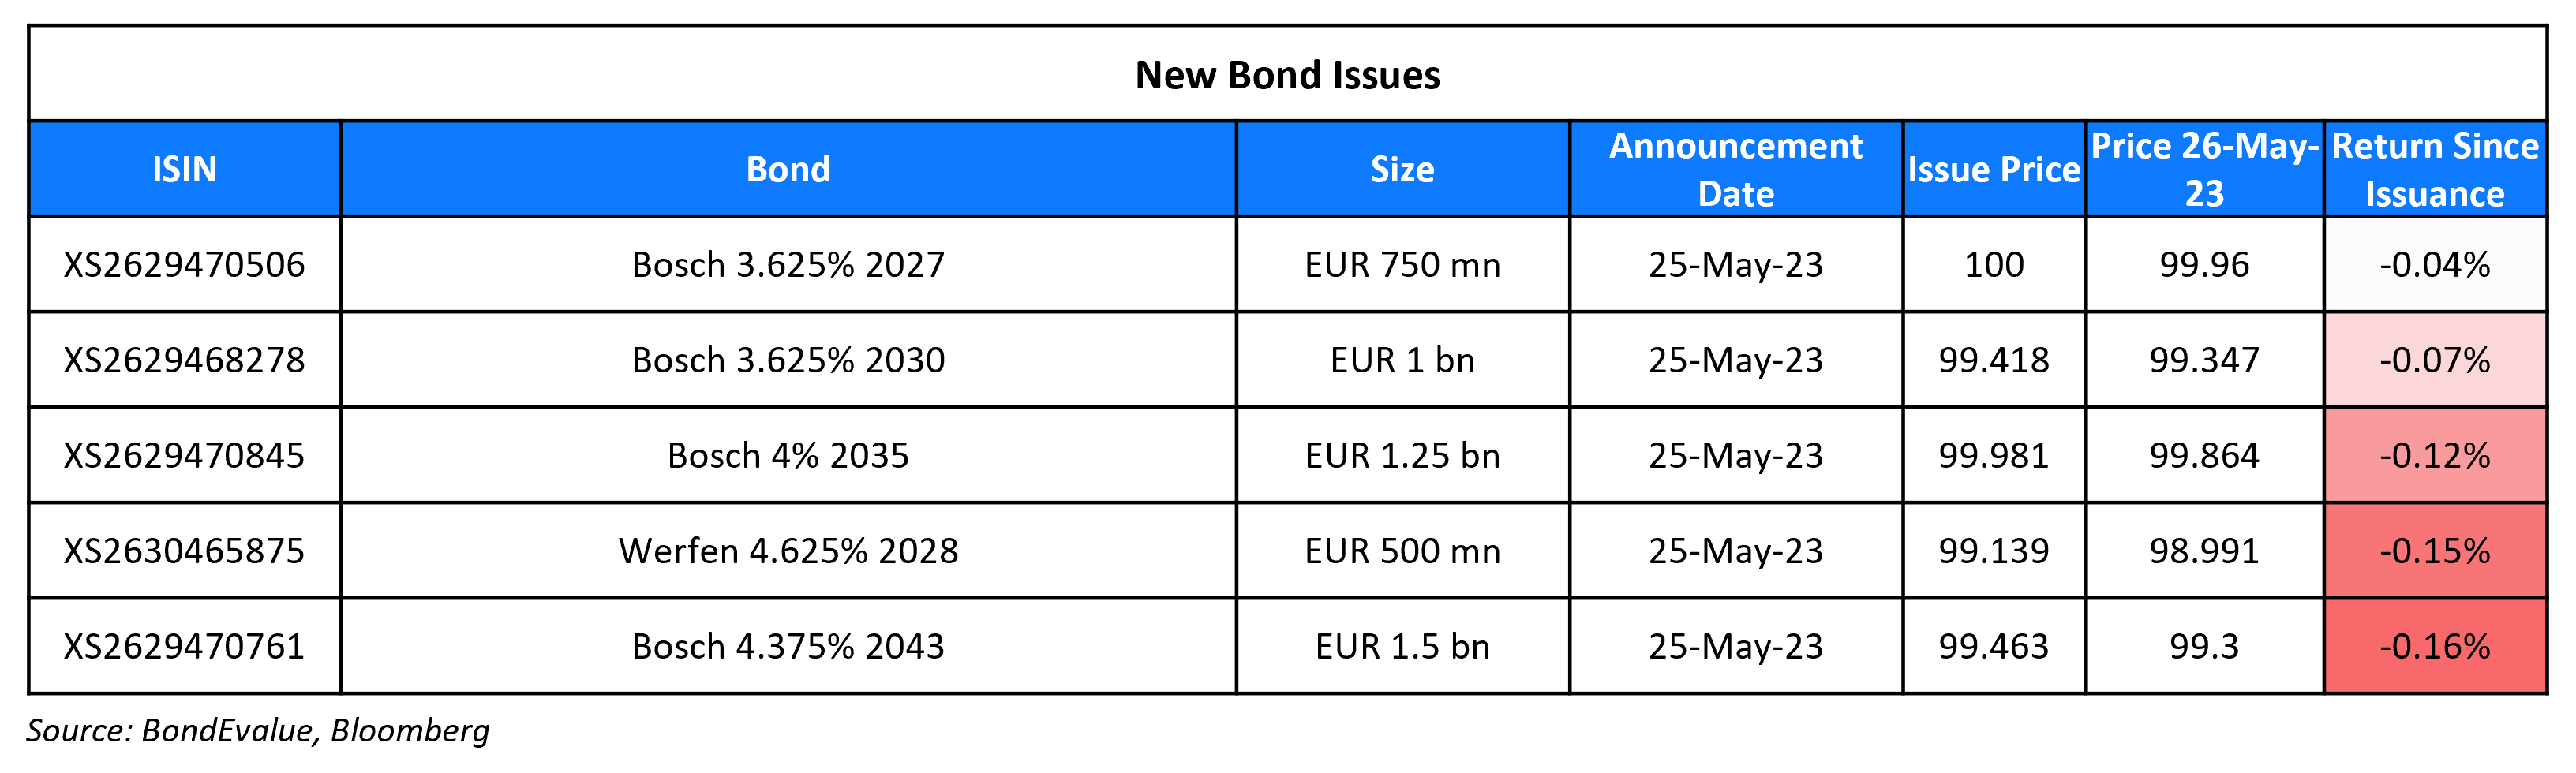 New Bond Issues 26 May 23